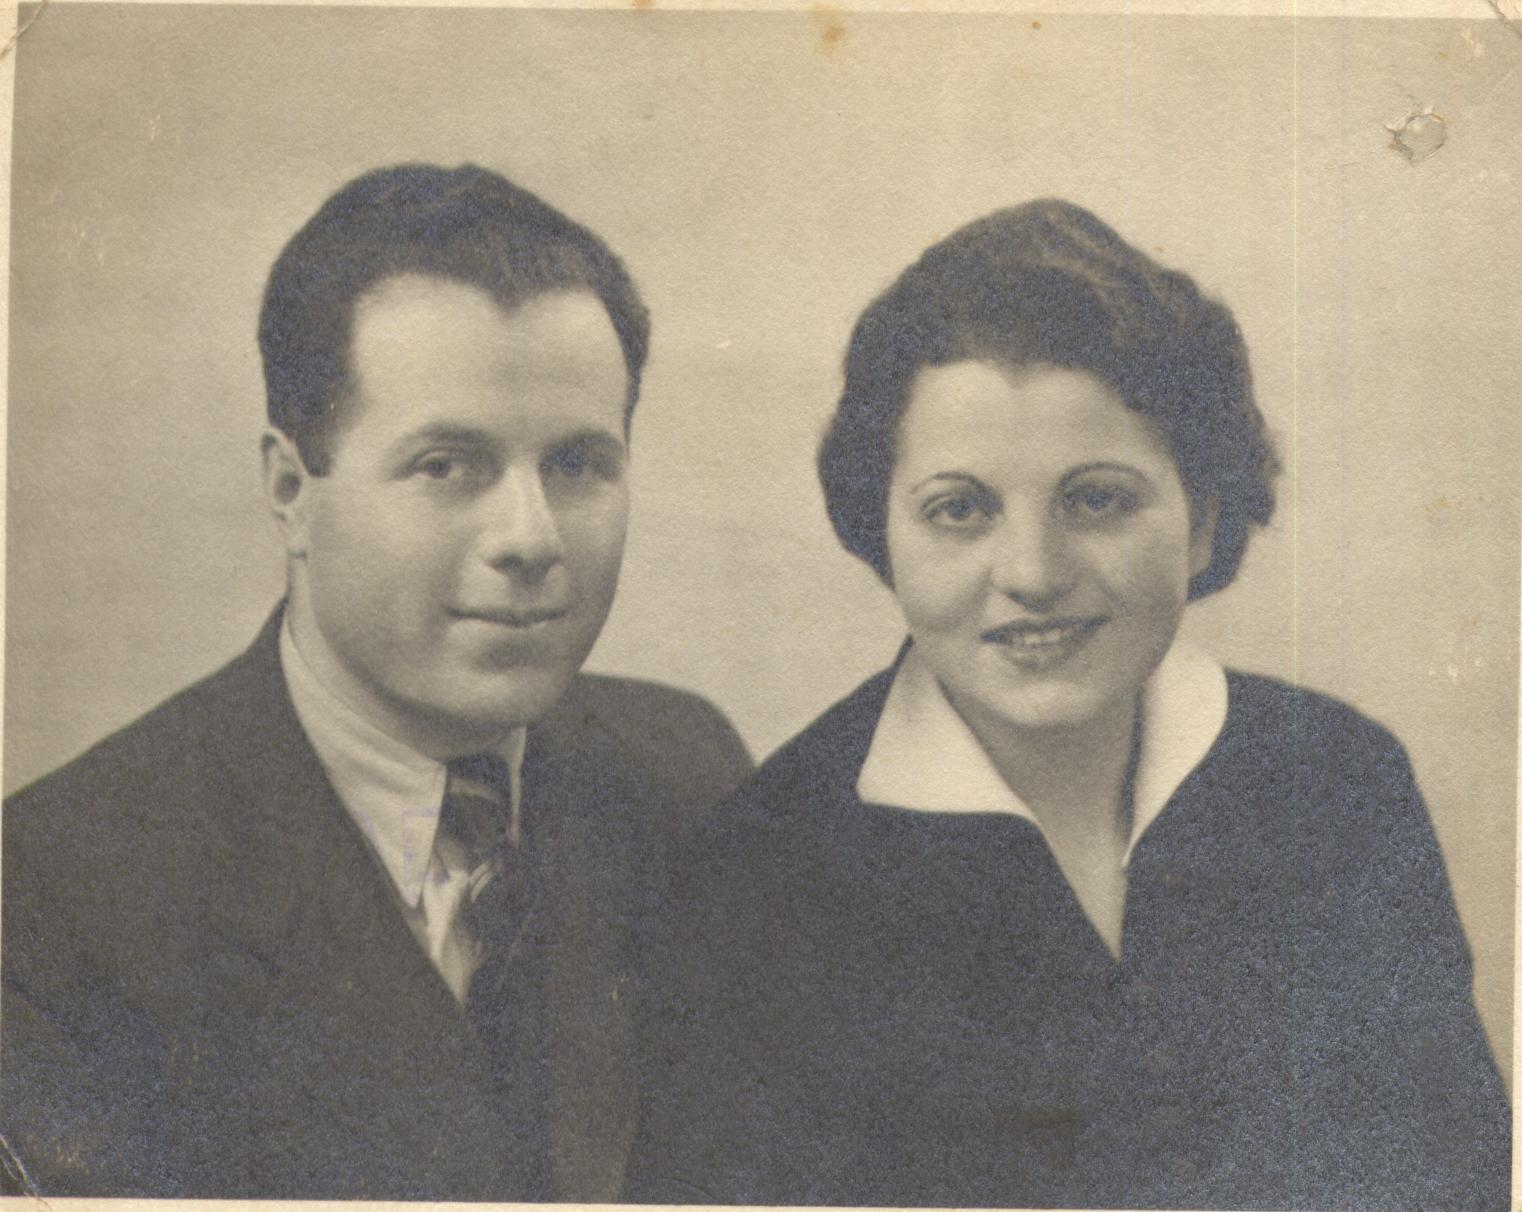 Eric and Hilde Blumenthal